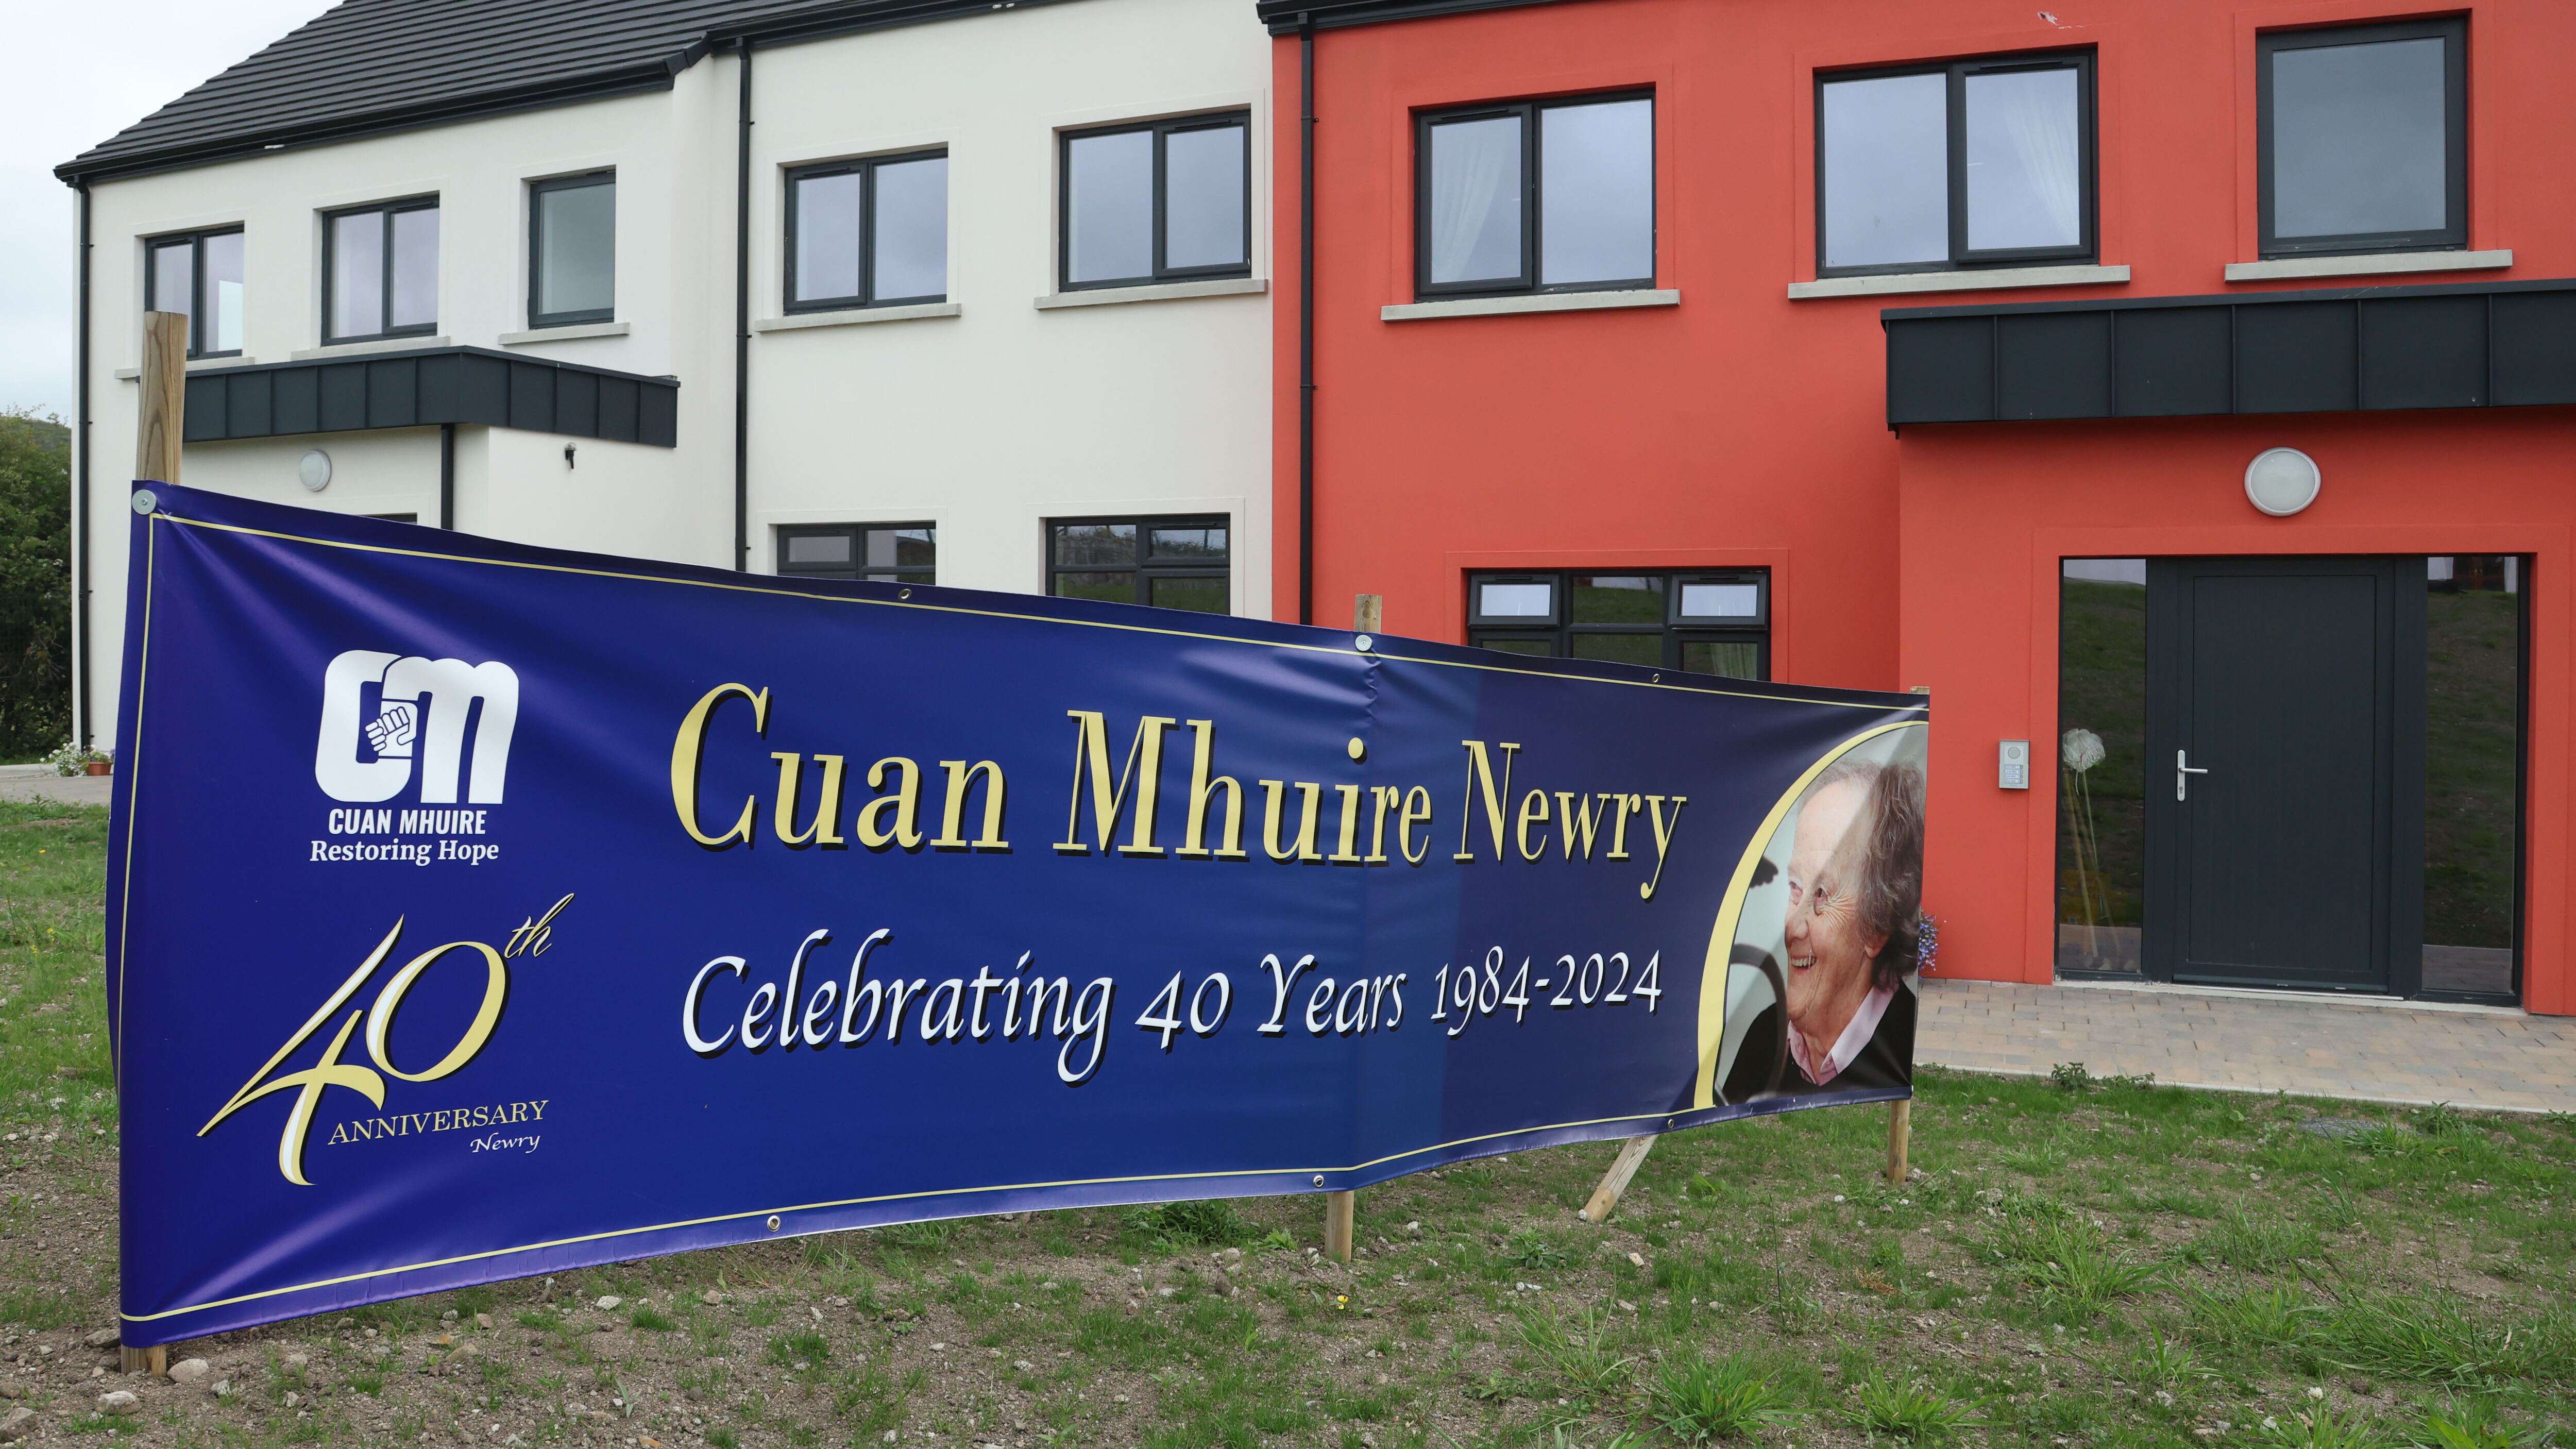 New apartments block at Cuan Mhuire in Newry who celebrating 40 years.
PICTURE COLM LENAGHAN